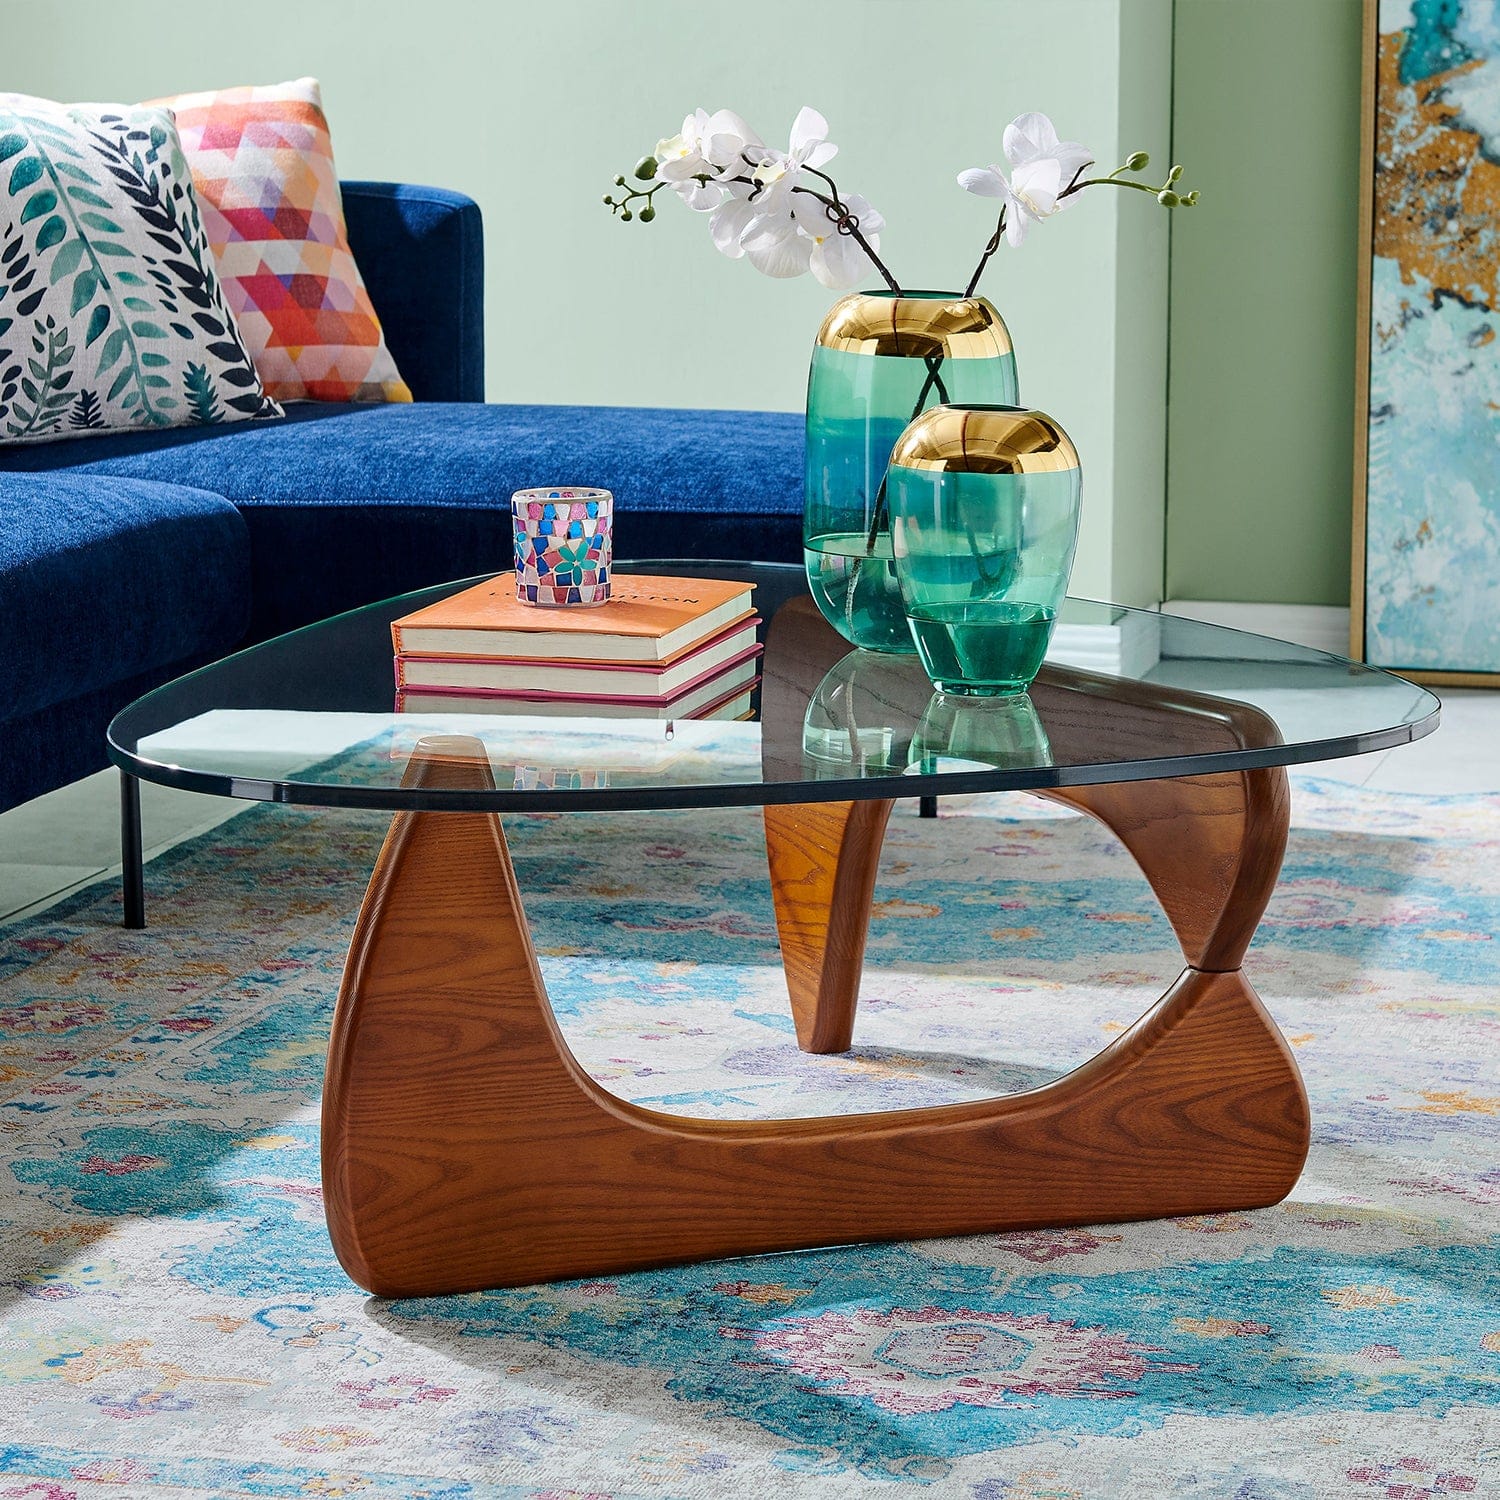 Noguchi Table Replica - Timeless Design with Solid Wood Legs and Glass Top.